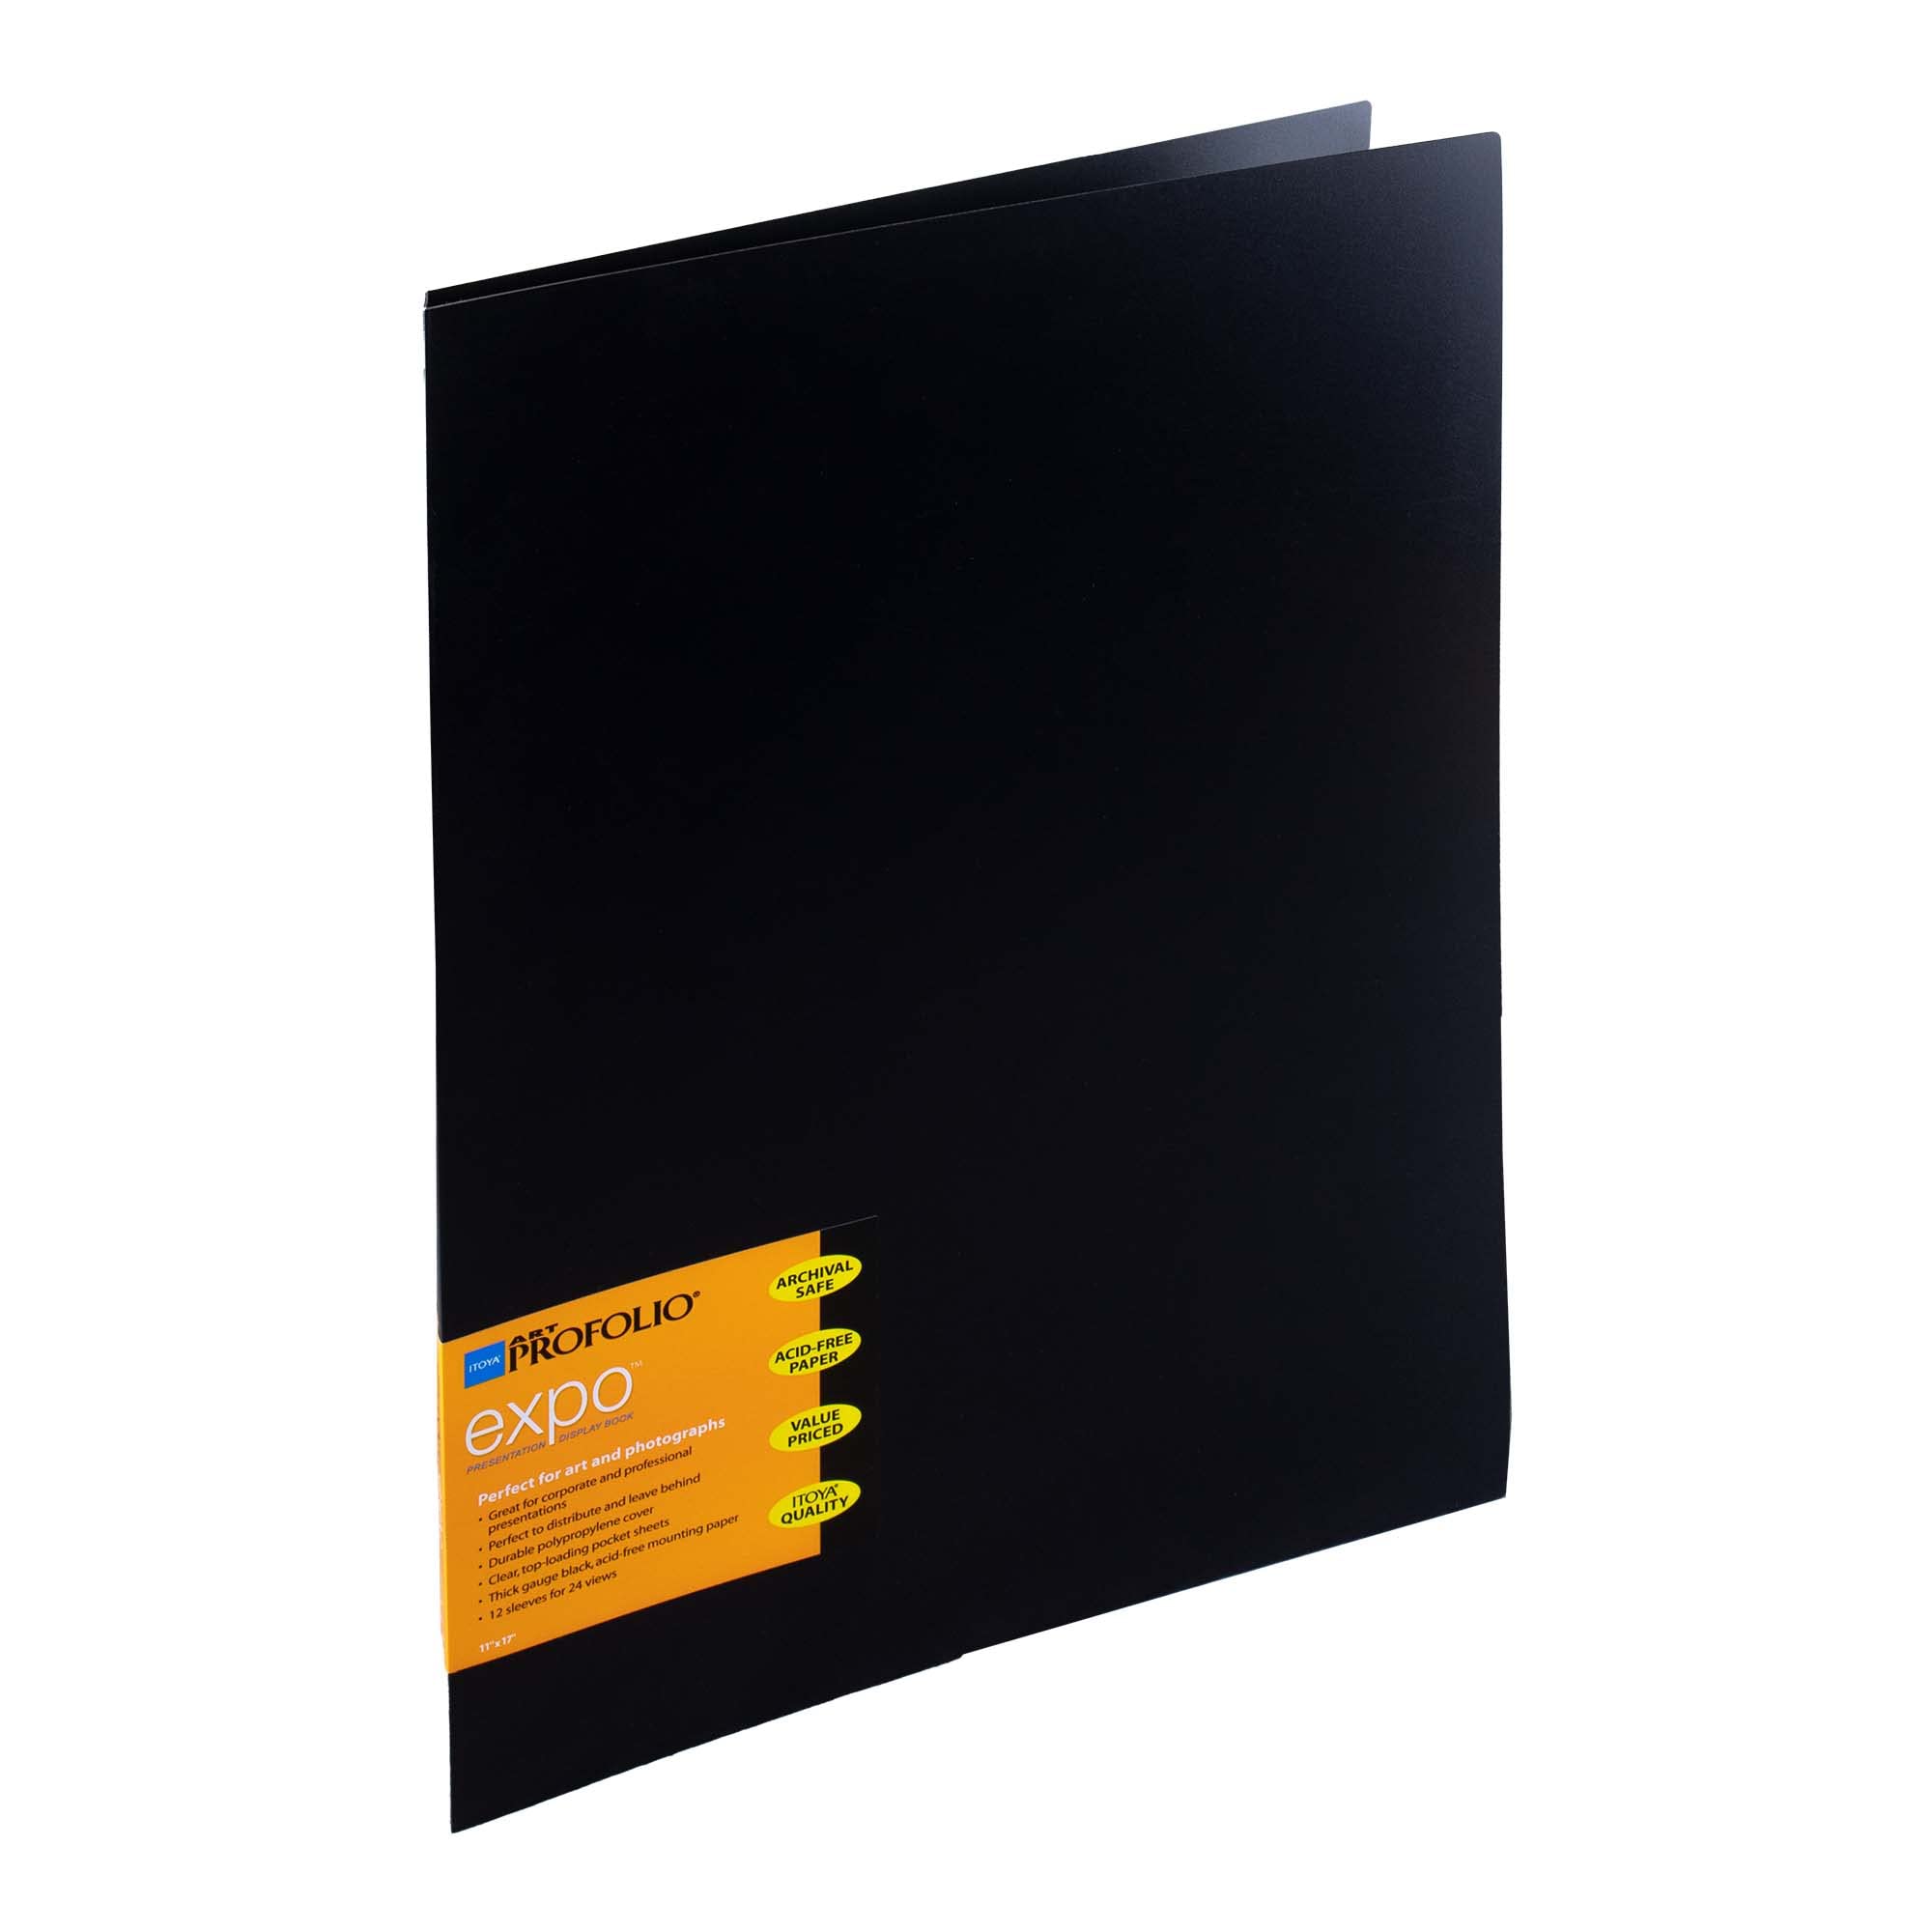 Itoya ProFolio Expo 11x17 Black Art Portfolio Binder with Plastic Sleeves  and 24 Pages - Portfolio Folder for Artwork with Clear Sheet Protectors -  Presentation Book for Art Display and Storage